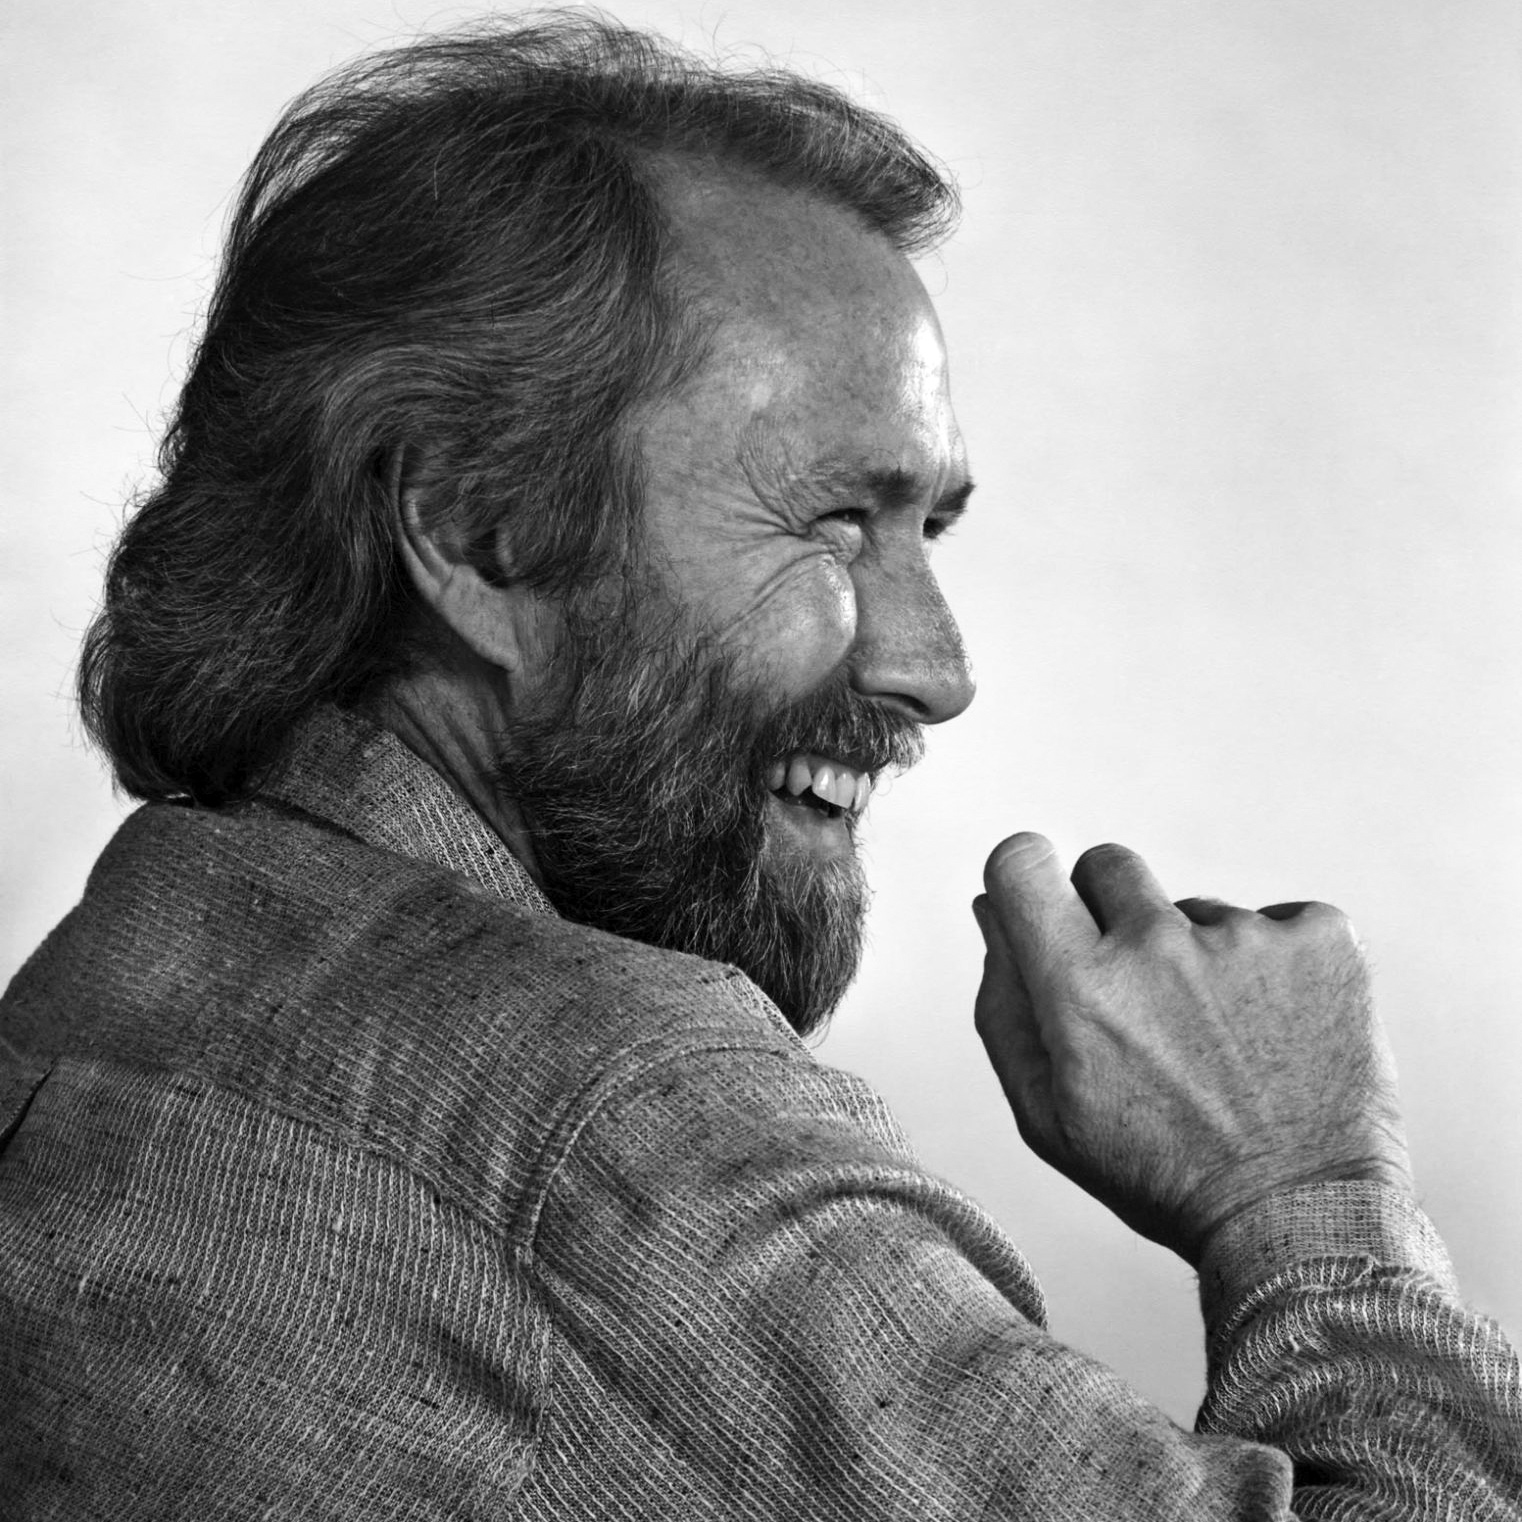 Portrait of Jim Henson by Yousuf Karsh from the National Portrait Gallery. 